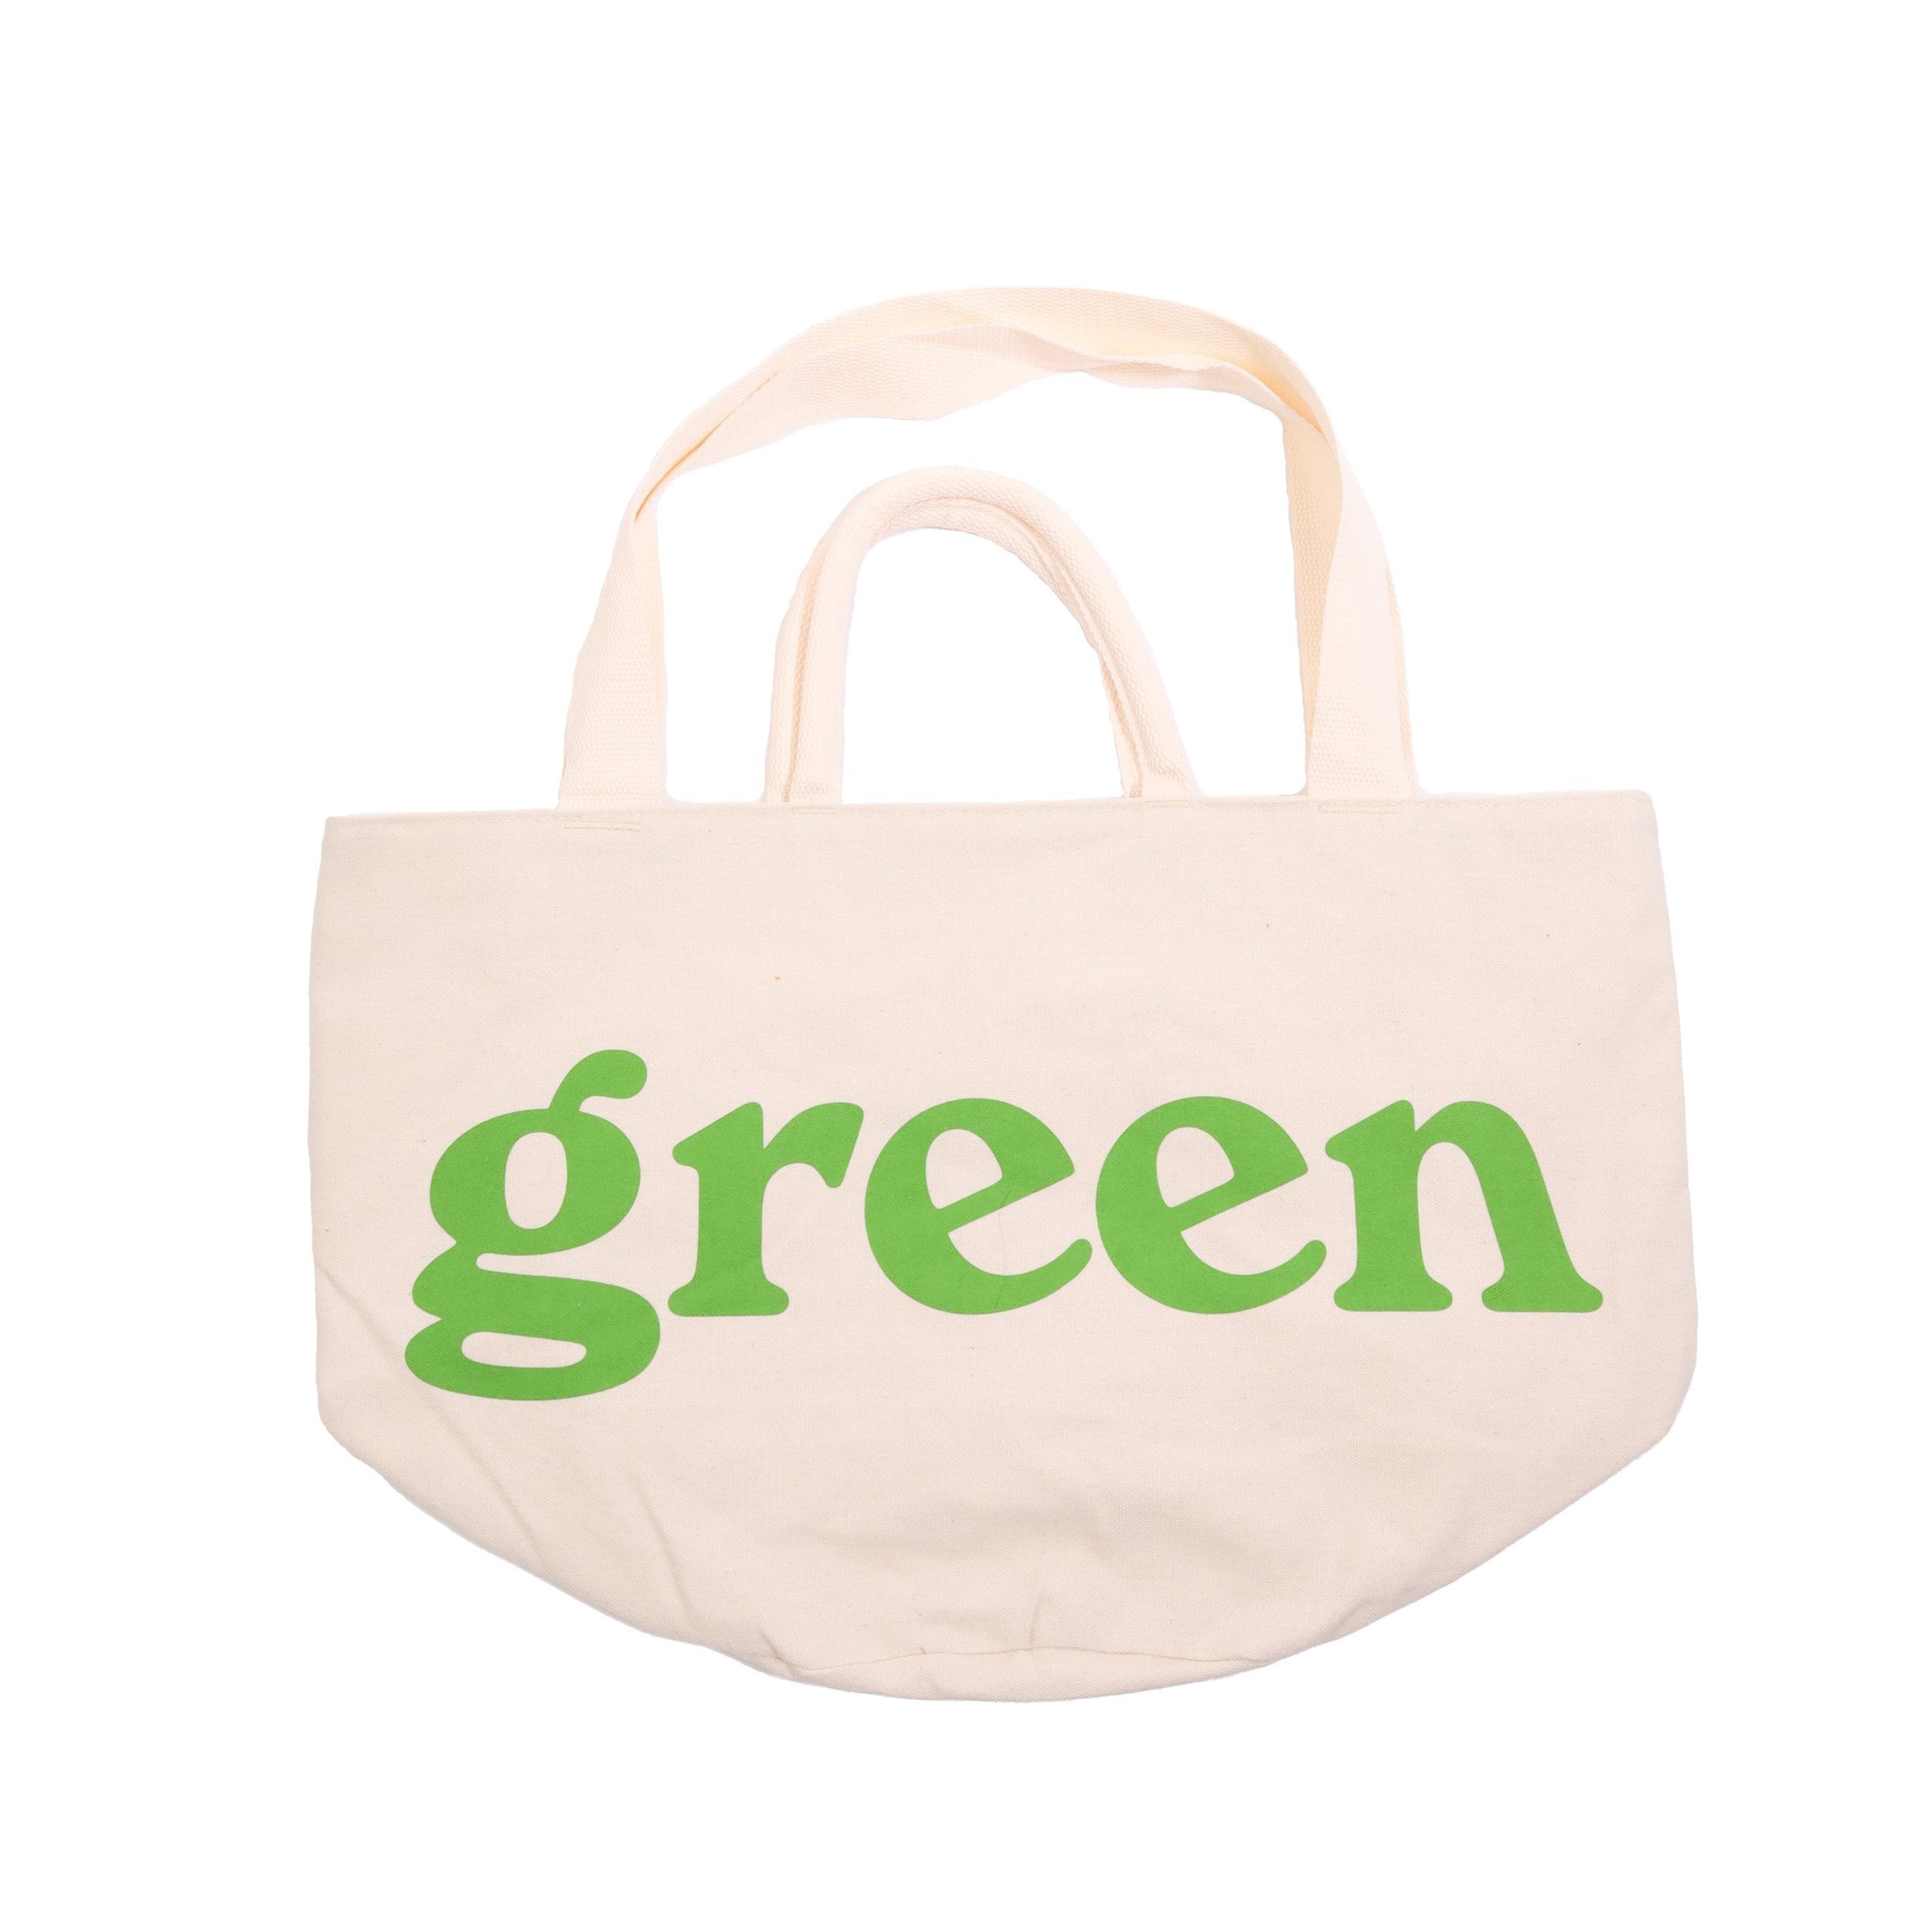 Medium Round Tote / Grow Bag - Natural-Mister Green-Mister Green